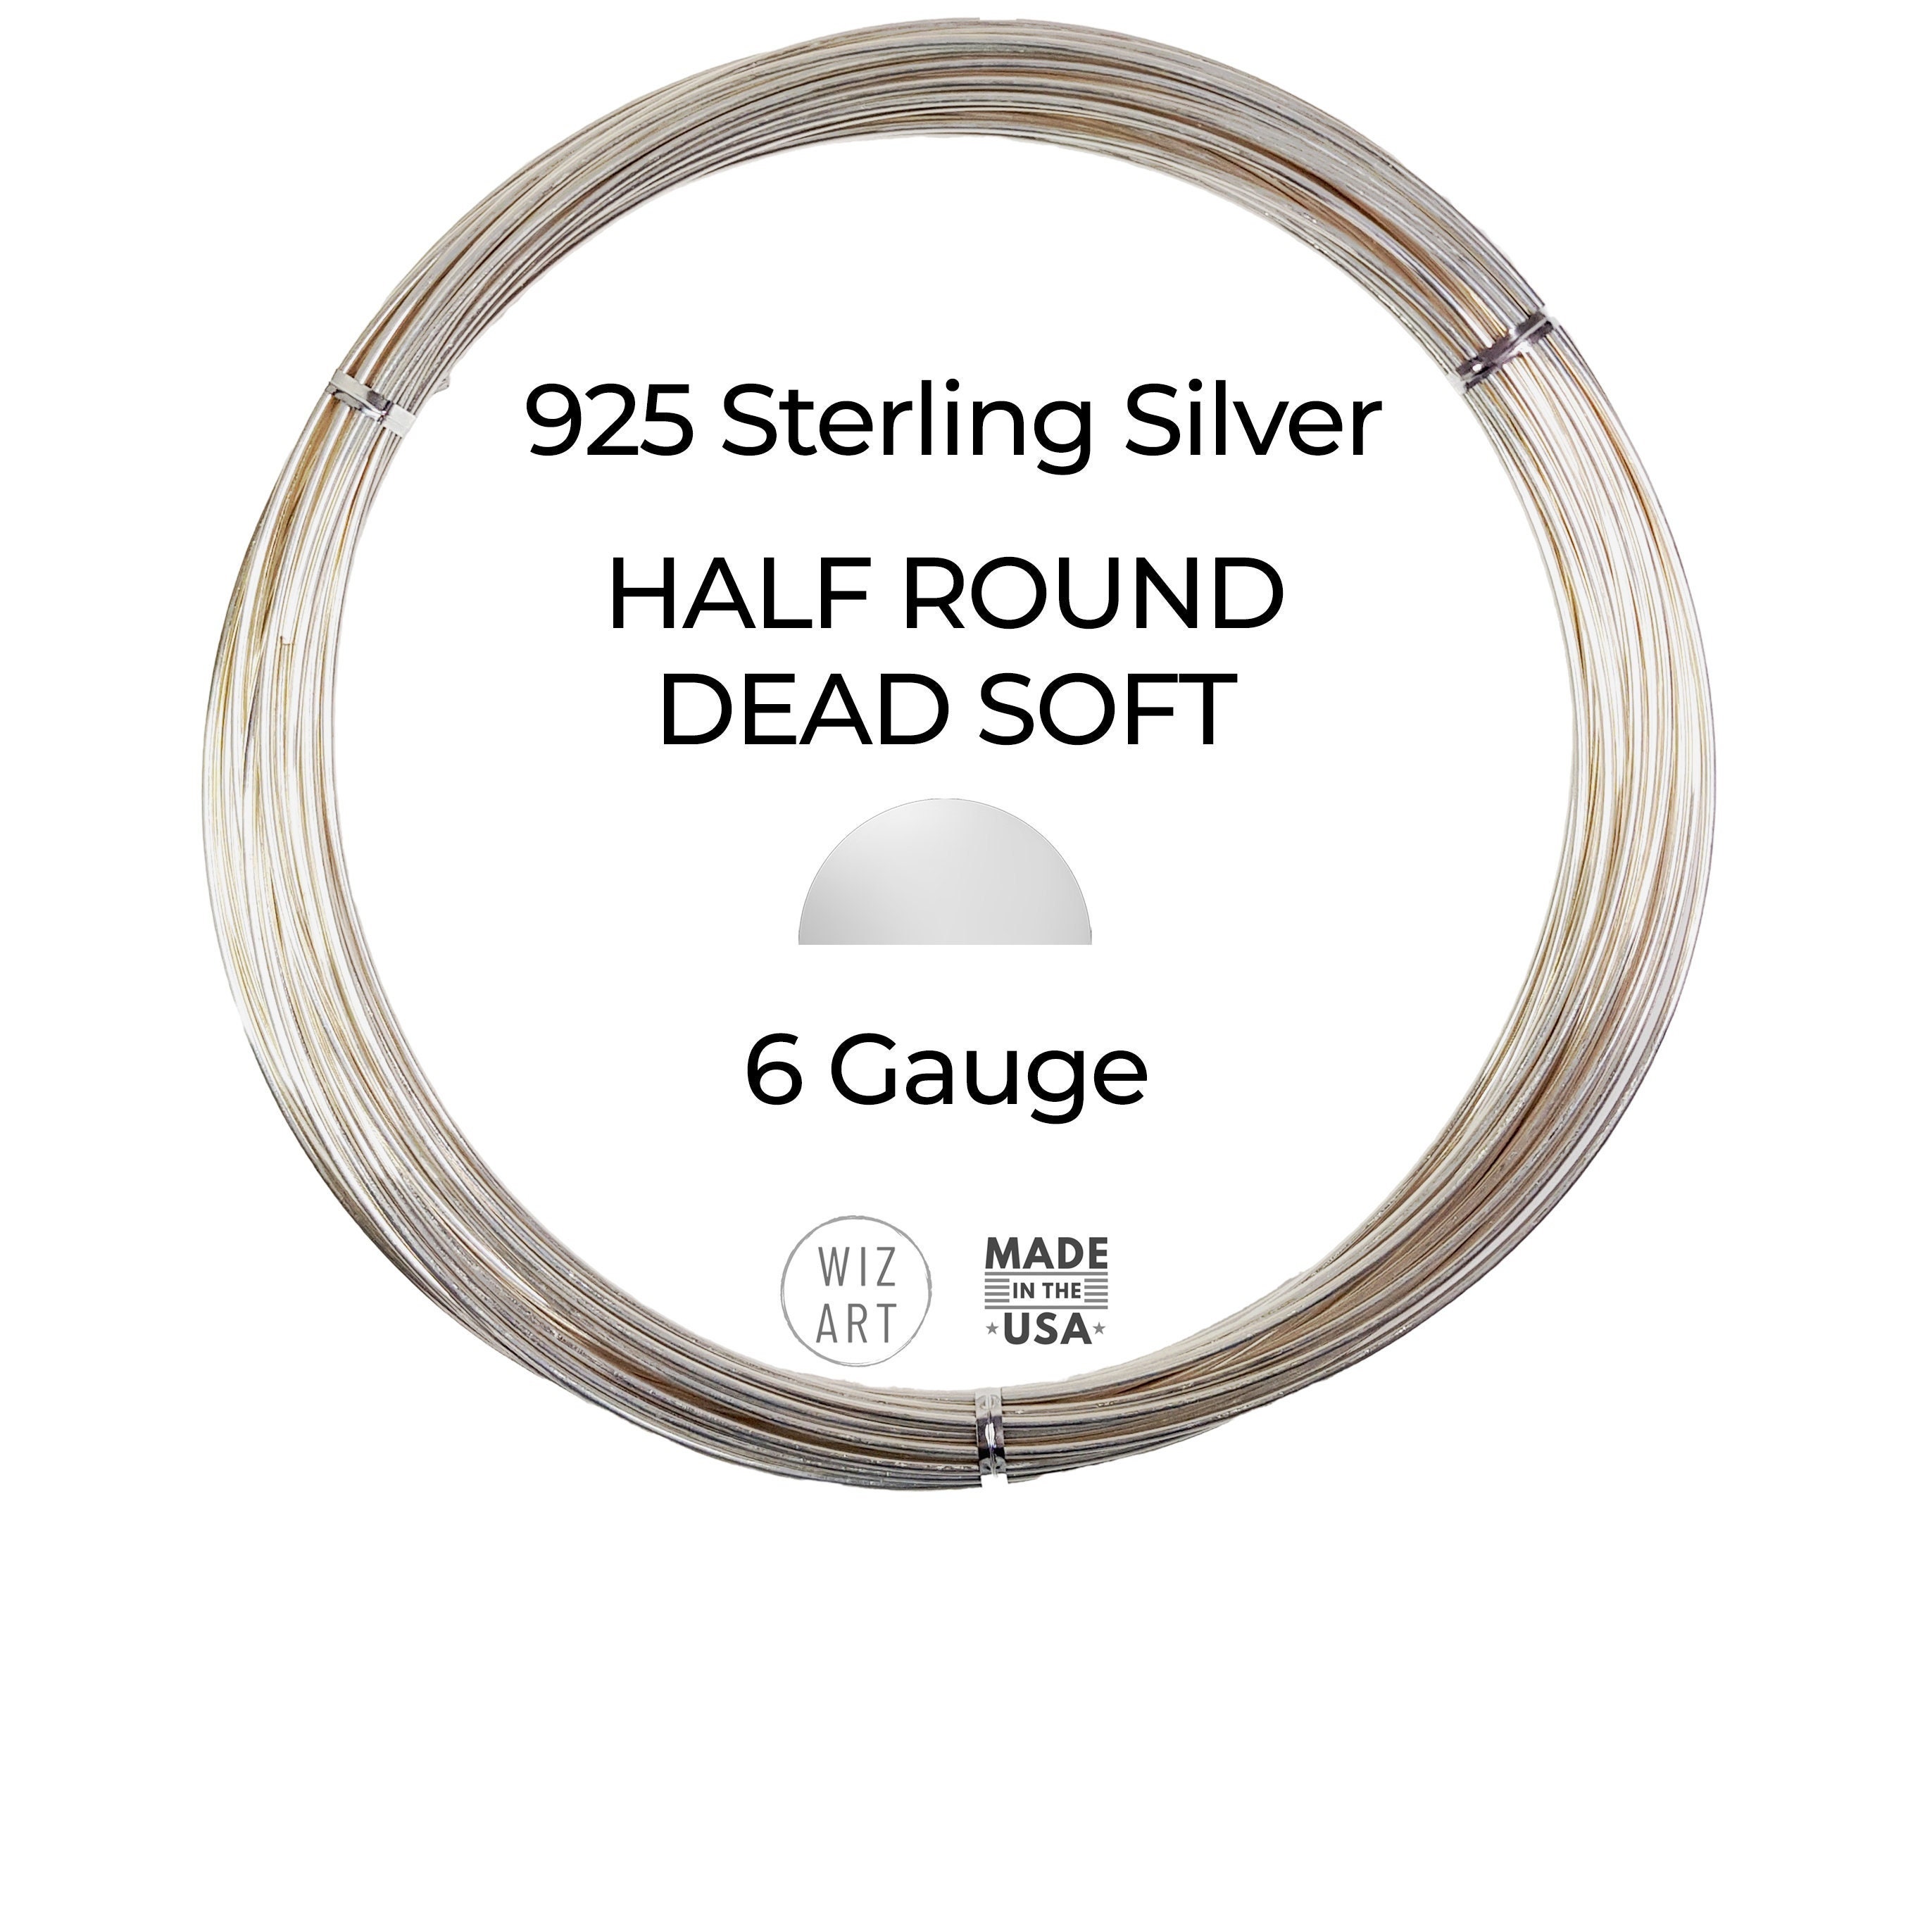 1 Meter 925 Sterling Silver Wire Jewelry Making  0.3/0.4/0.5/0.6/0.7/0.8/0.9/1/1.2mm Tarnish Resistant Silver Coil Wire